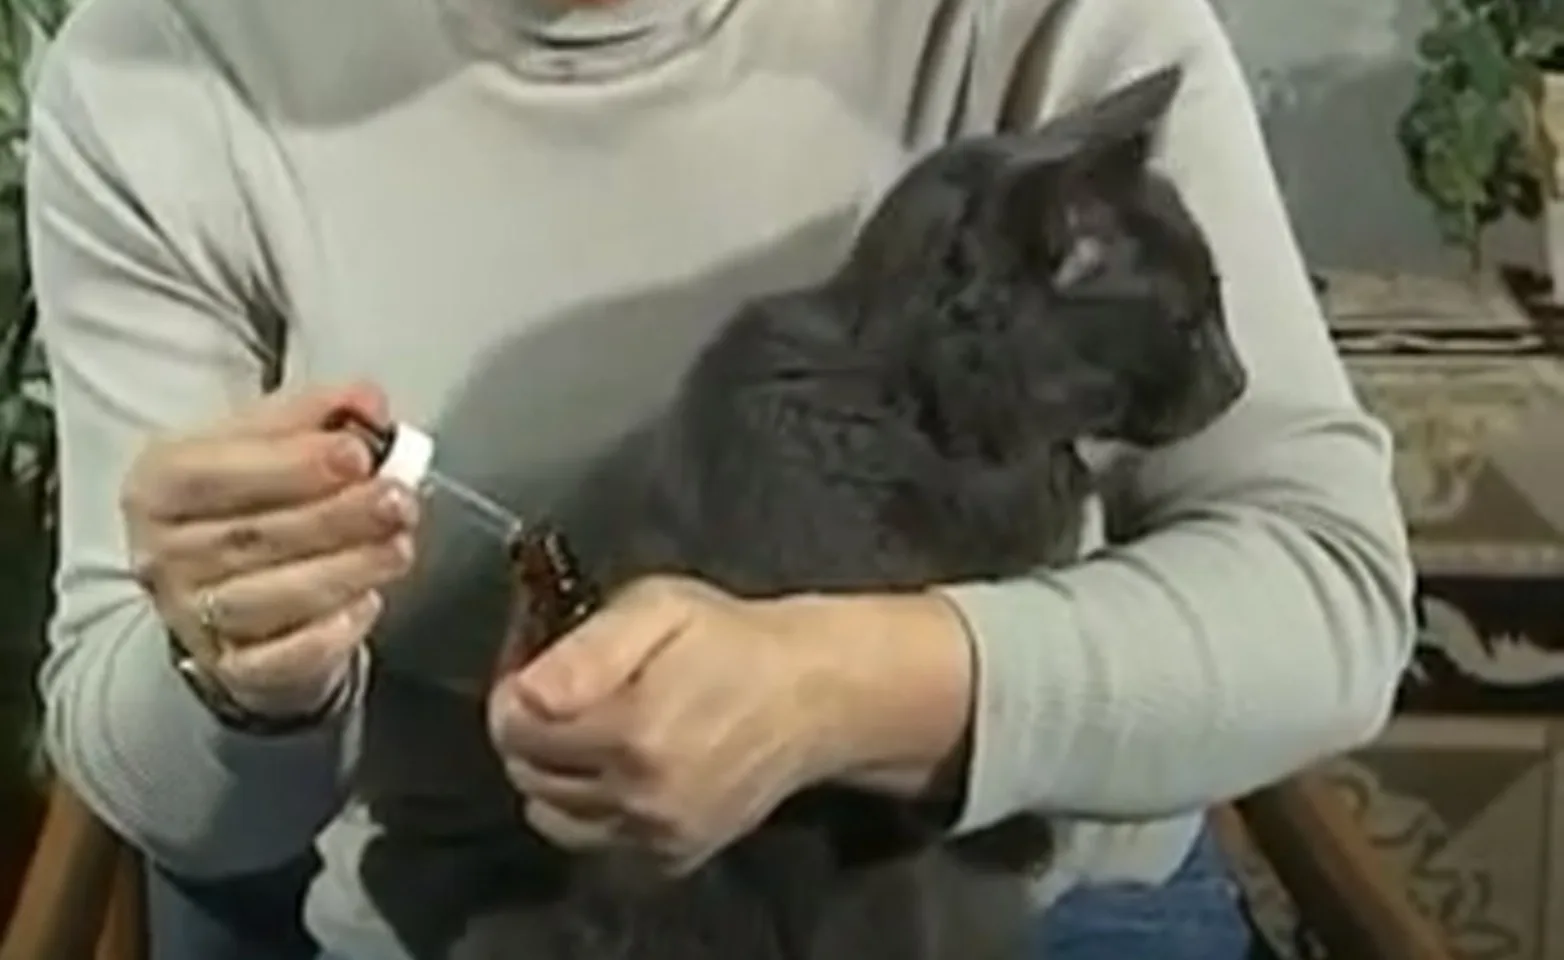 A person administering ear drops to your cat